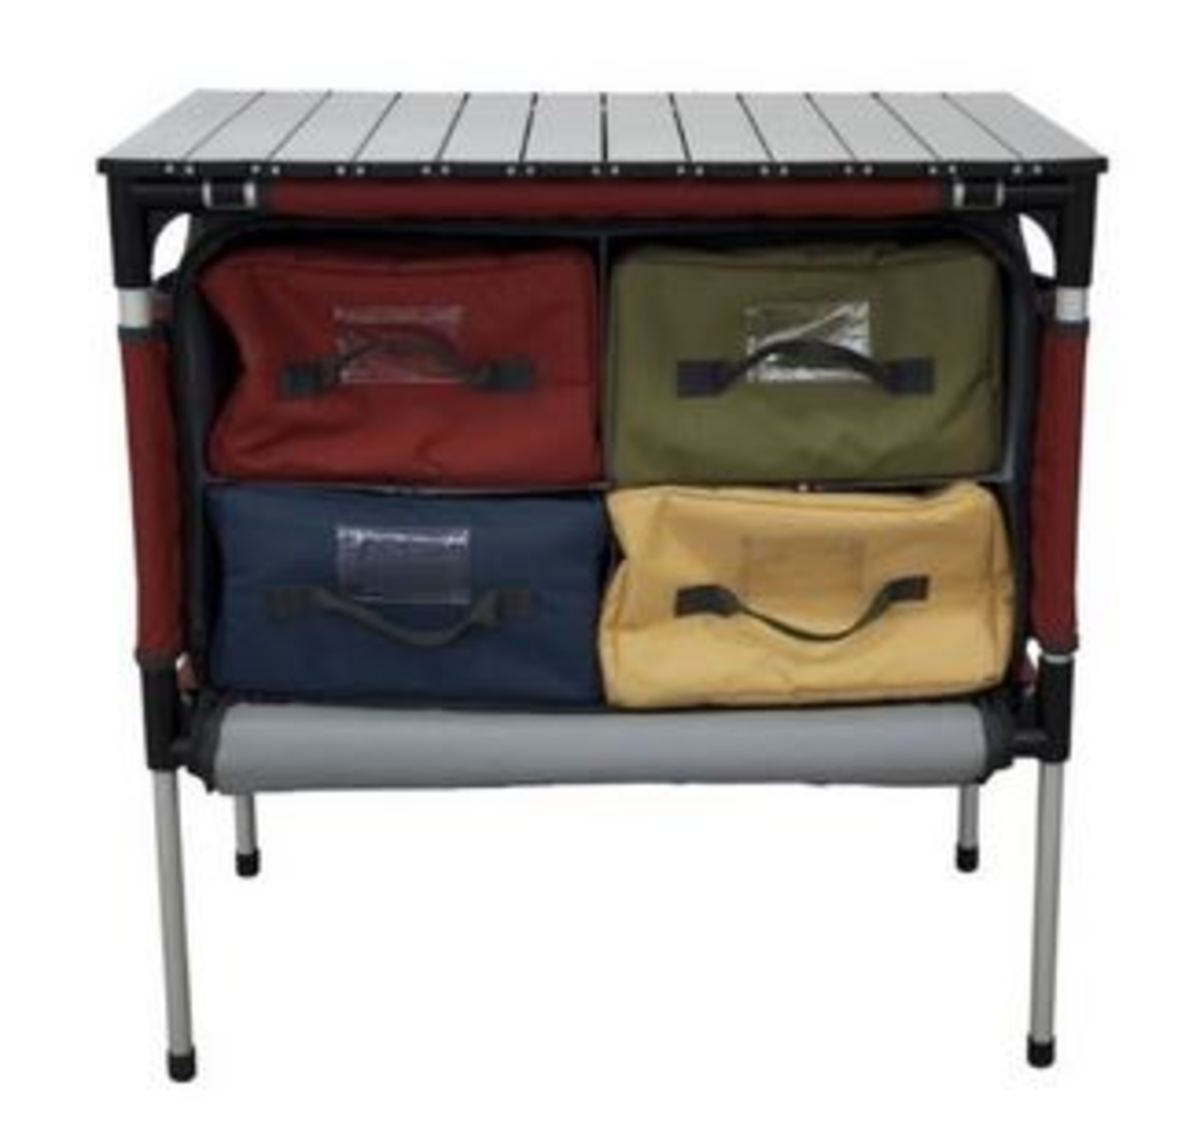 Review of the Camp Chef Sherpa Table & Organizer